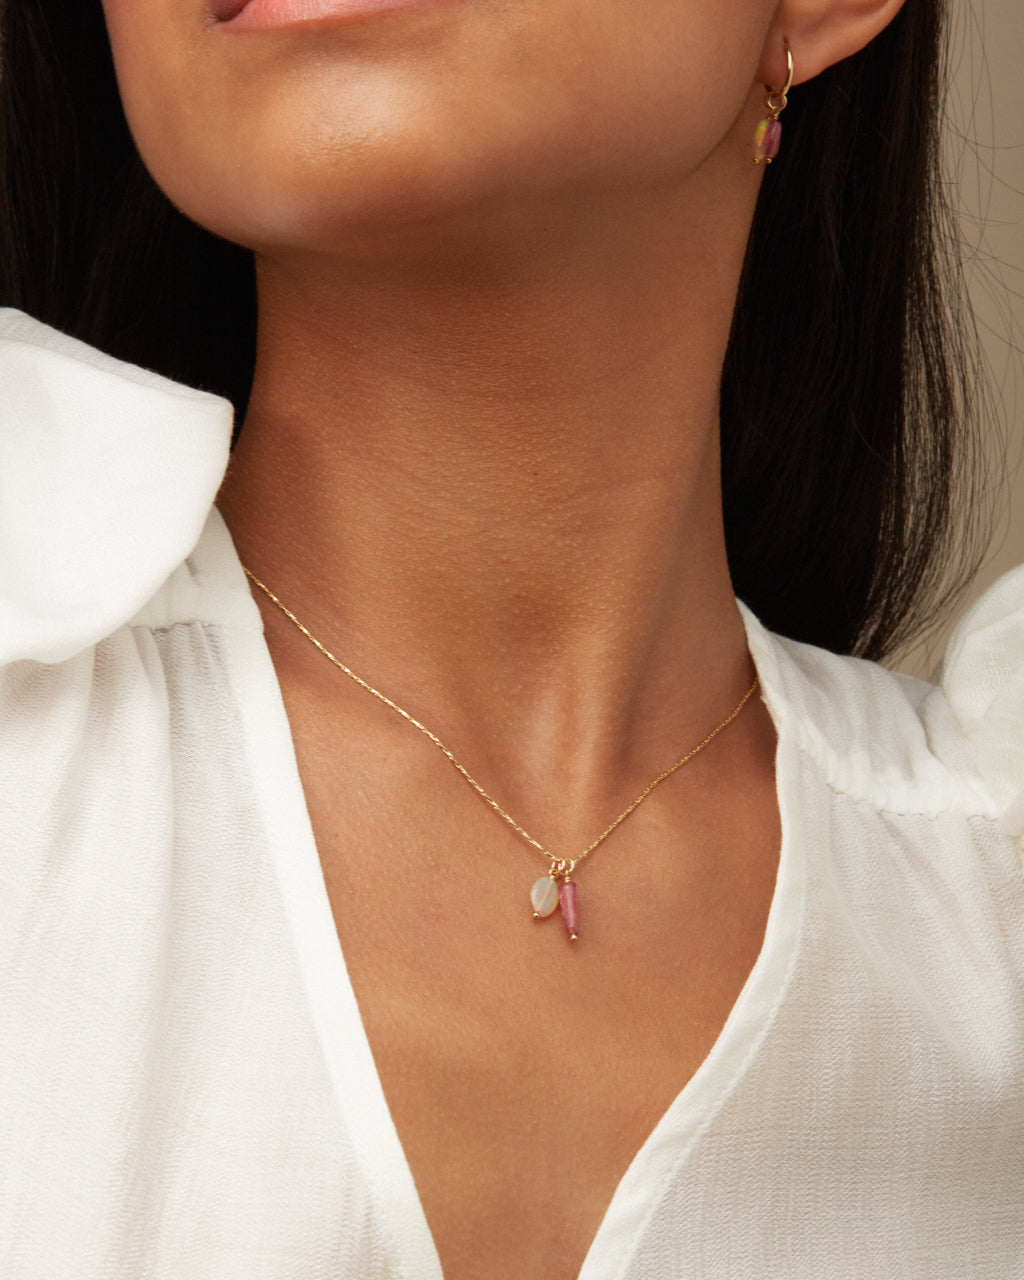 14K Gold Filled Opal & Tourmaline Necklace | Inspiration Her Jewellery